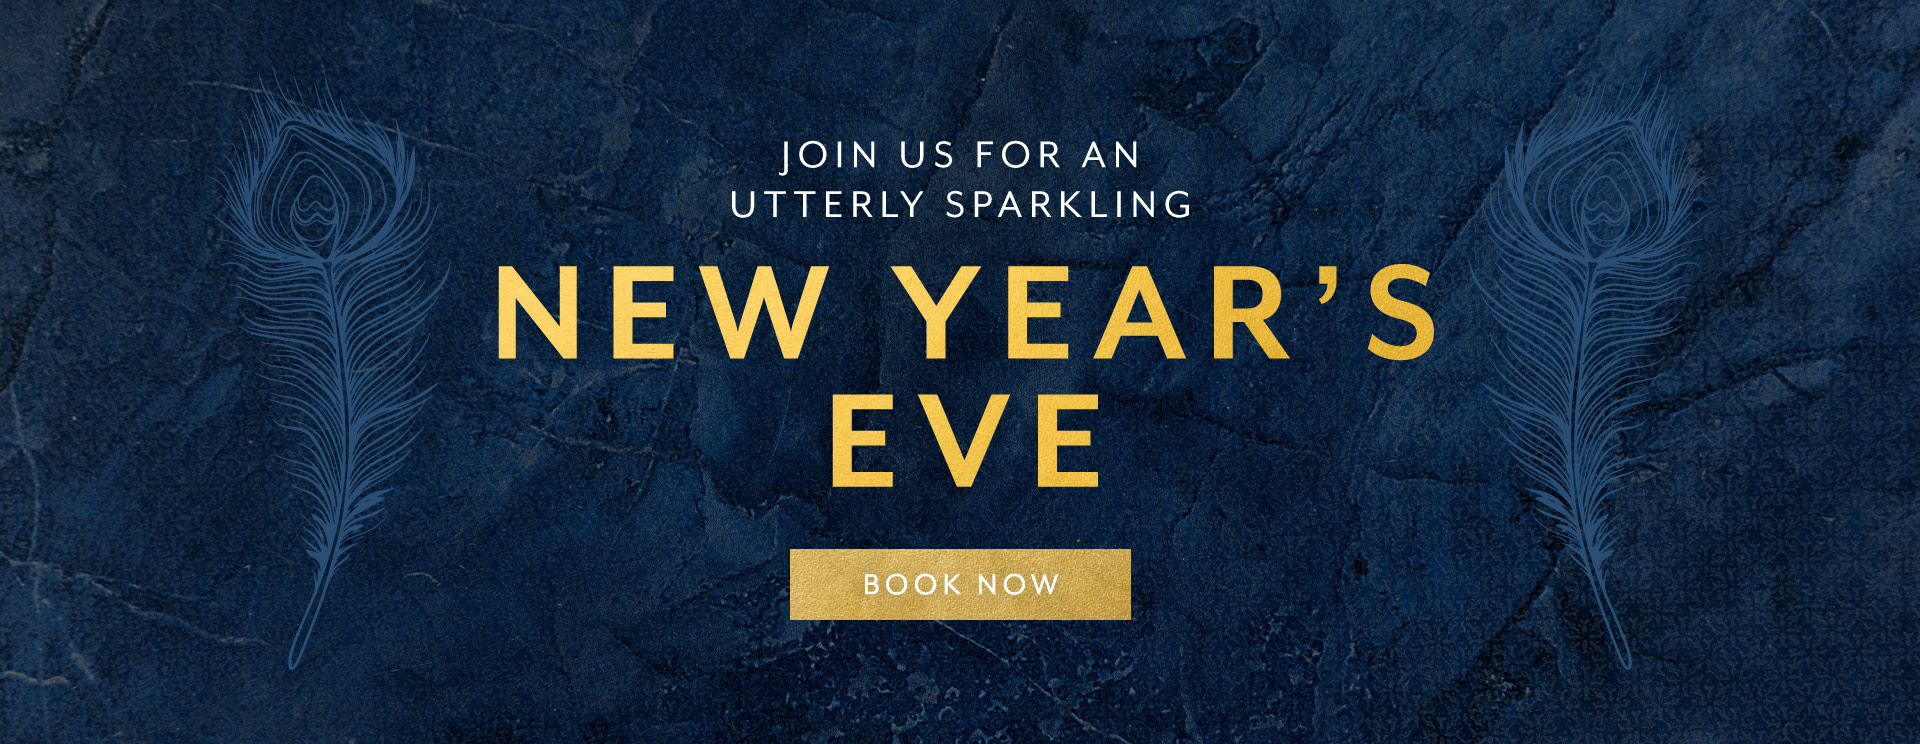 New Year's Eve at The Tudor Rose